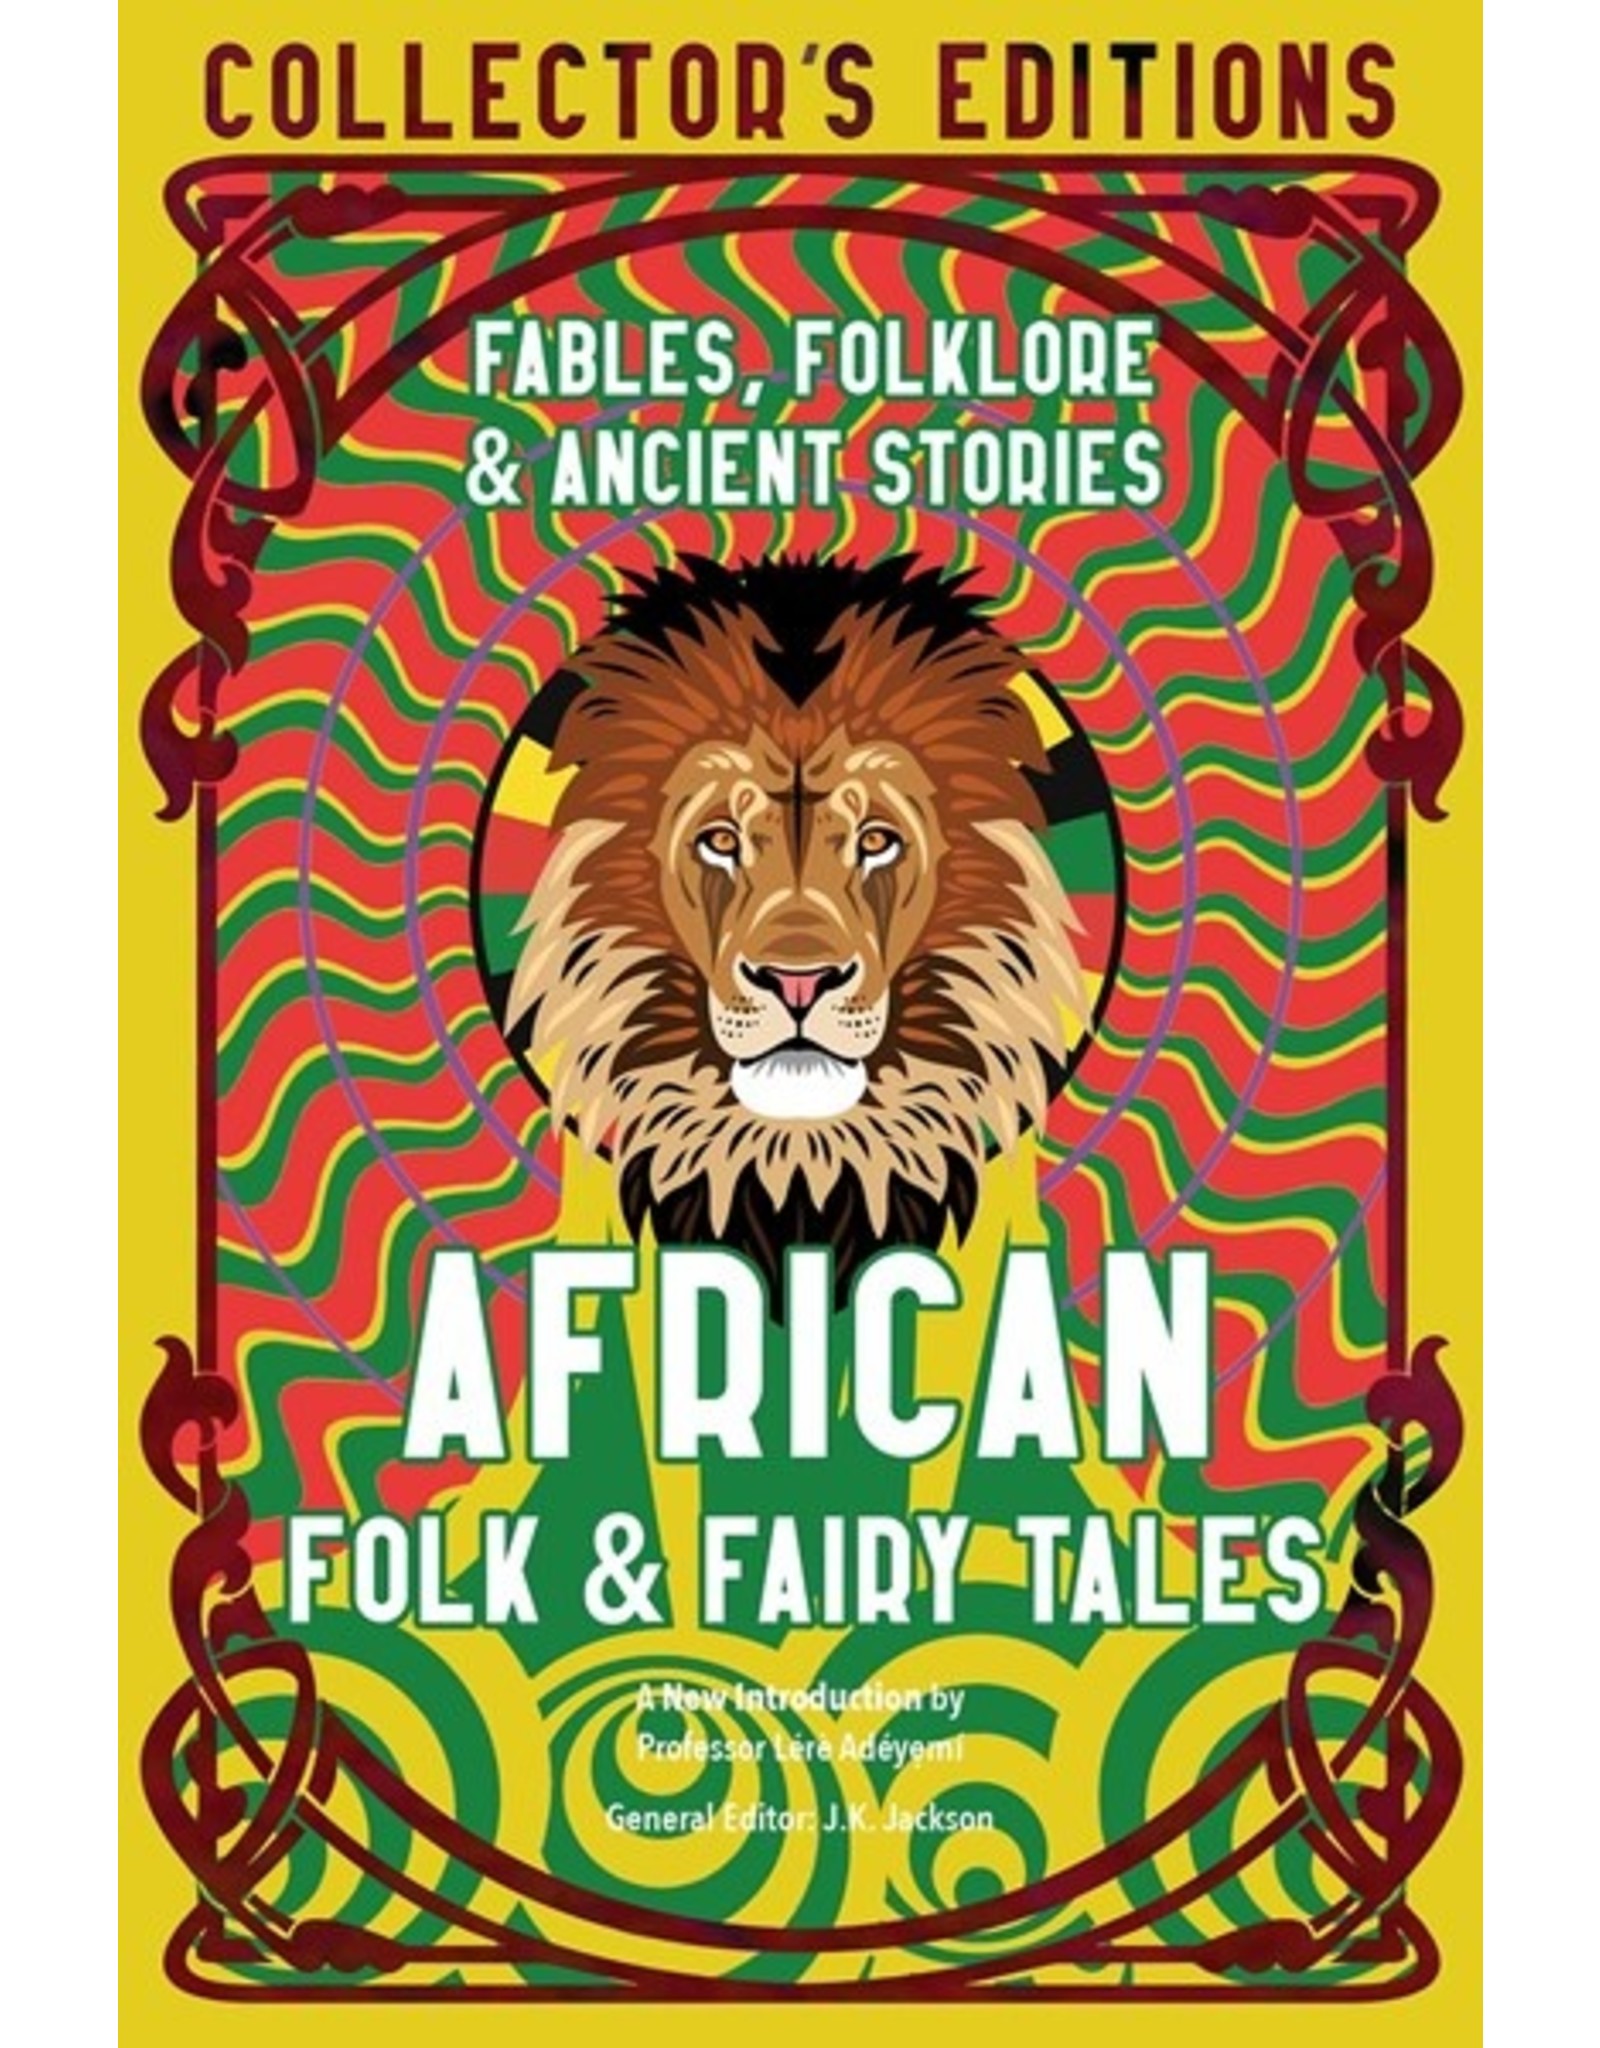 Books African Folk & Fairy Tales Collectors Edition by Professor Lere Adeyemi